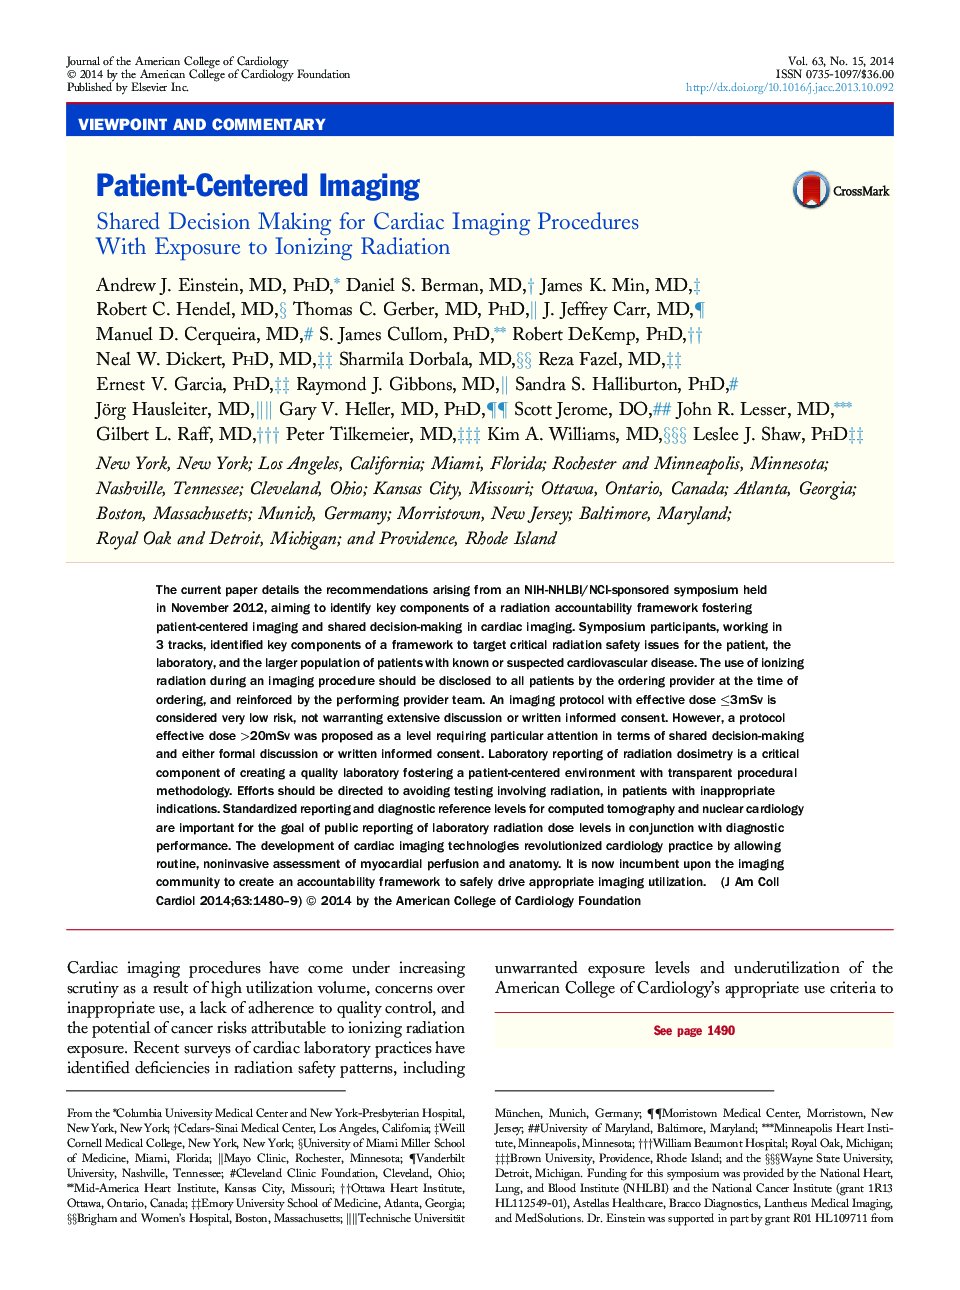 Patient-Centered Imaging : Shared Decision Making for Cardiac Imaging Procedures With Exposure to Ionizing Radiation